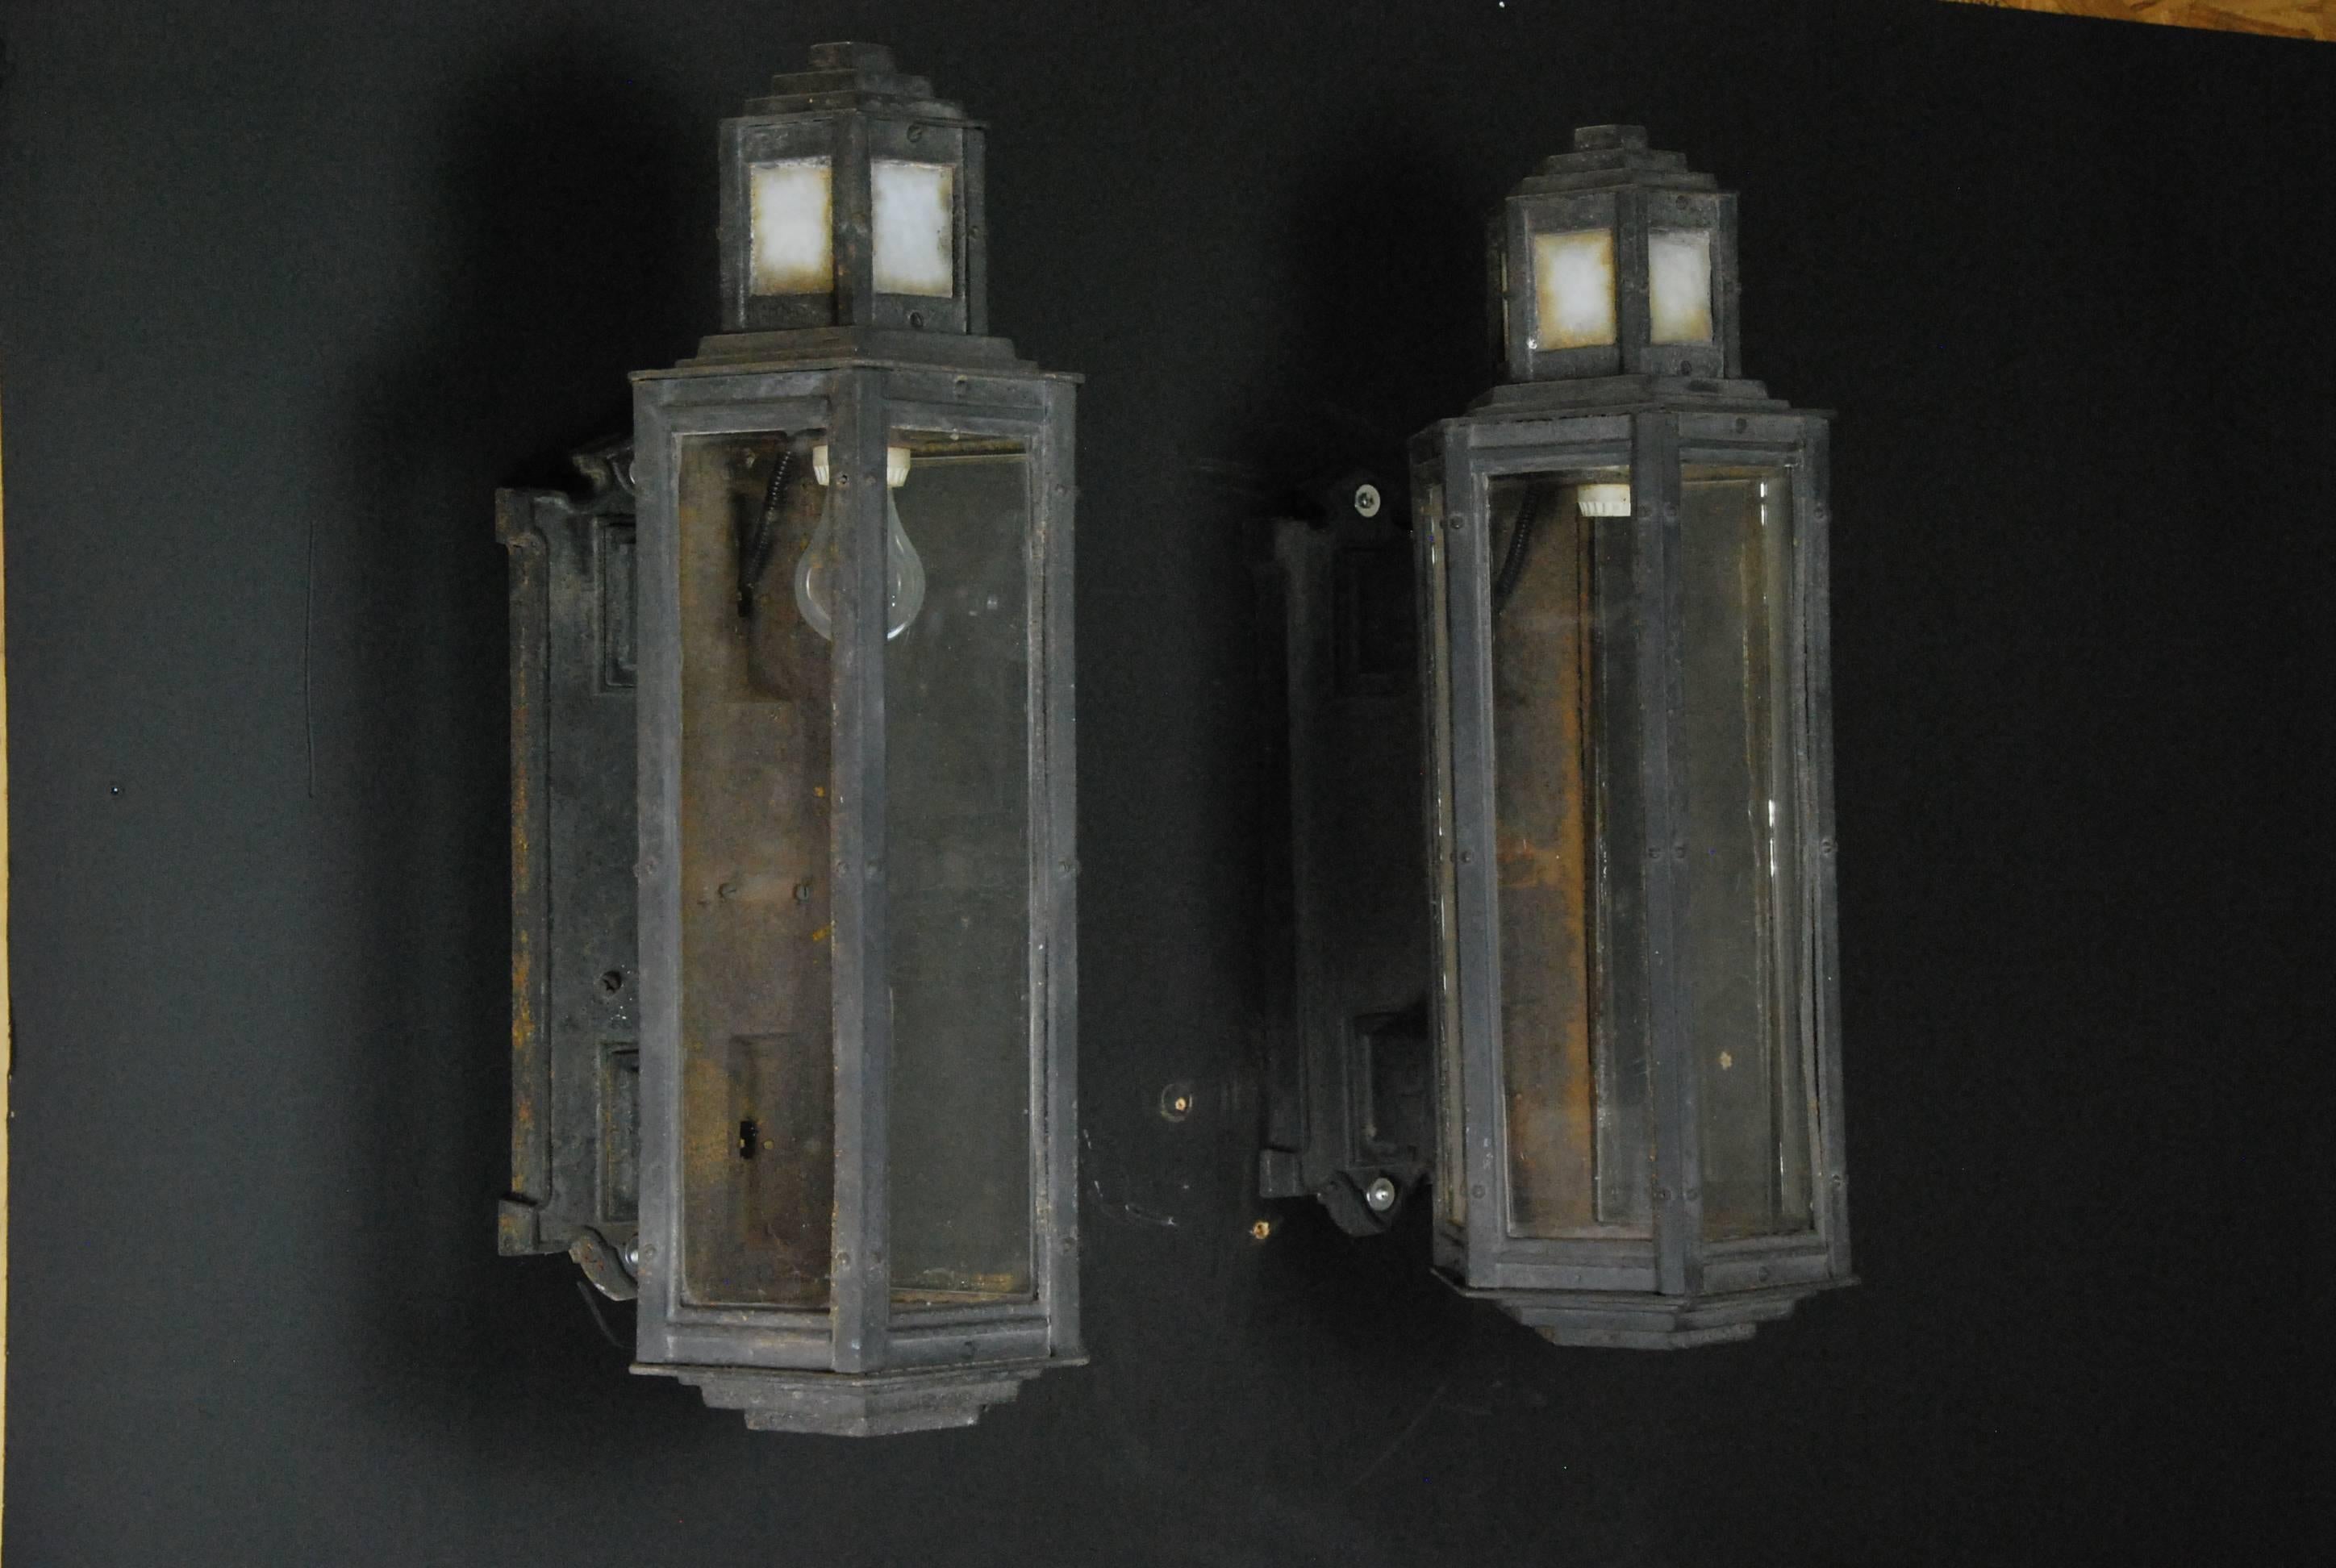 Nice set of four outdoor sconces refurbished and rewired with CSA approval.

Found in NYC.